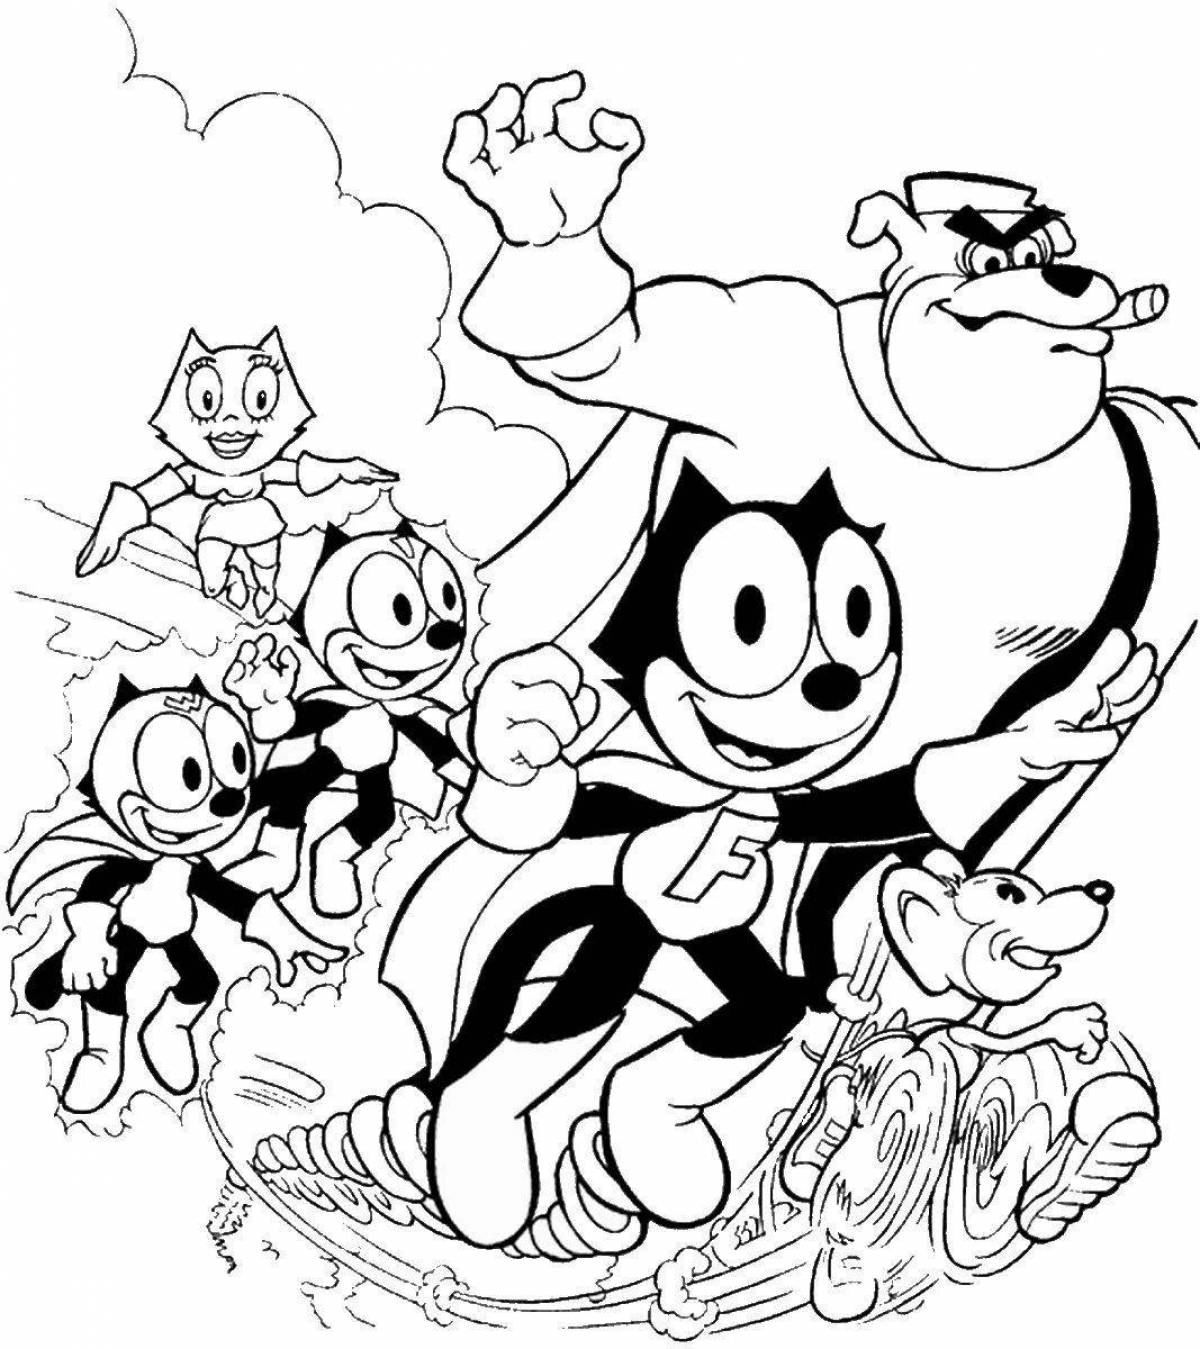 Felix the Cat holiday coloring page